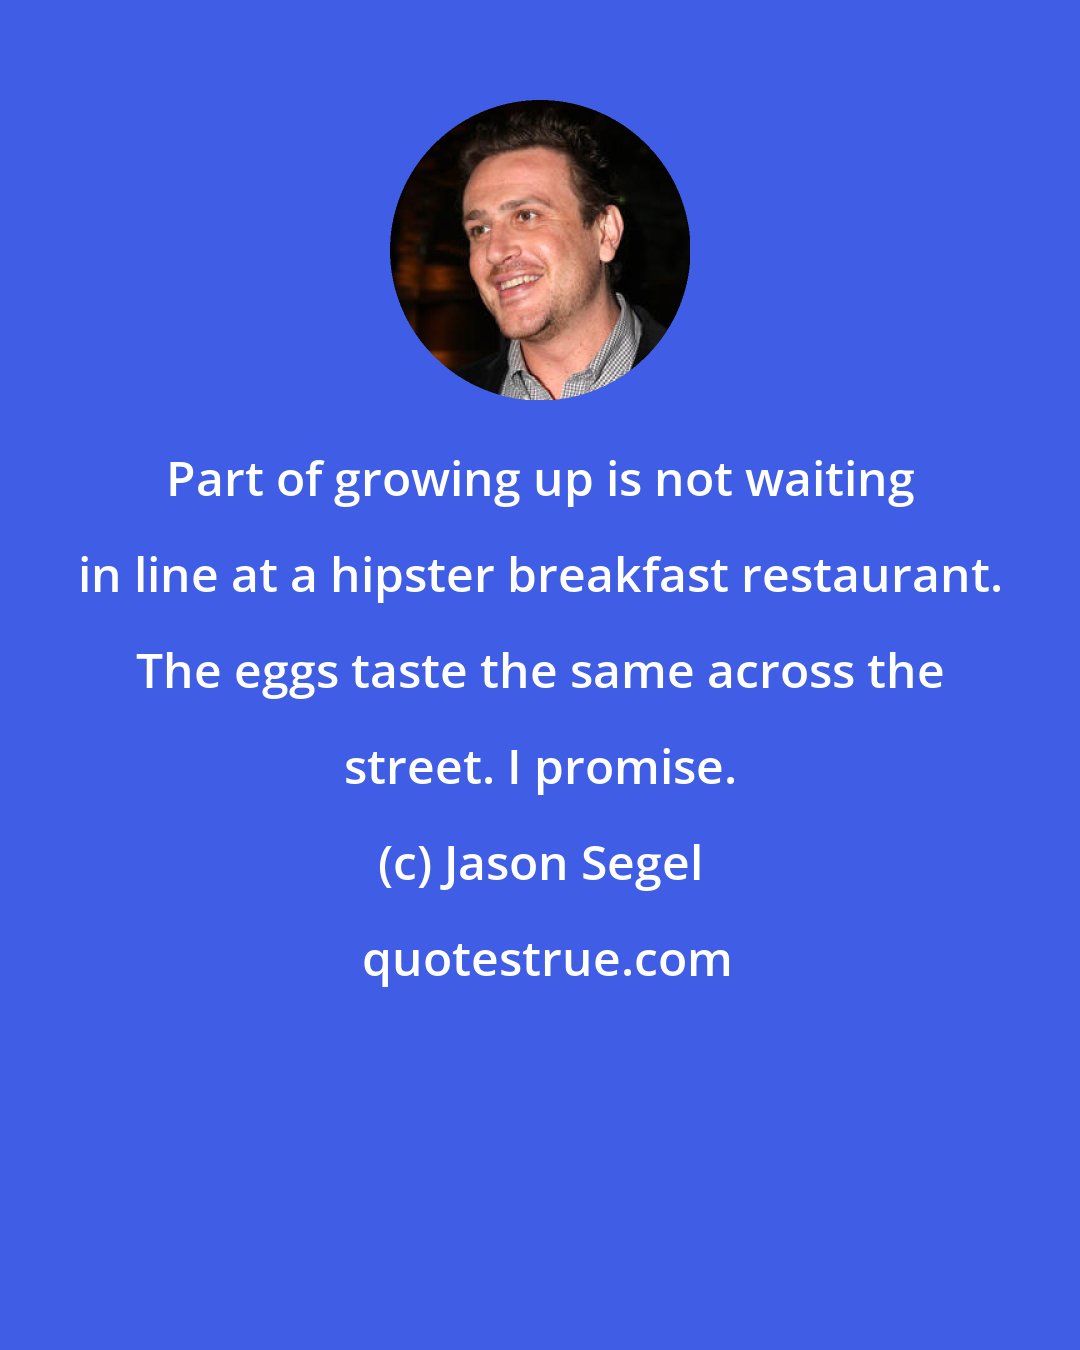 Jason Segel: Part of growing up is not waiting in line at a hipster breakfast restaurant. The eggs taste the same across the street. I promise.